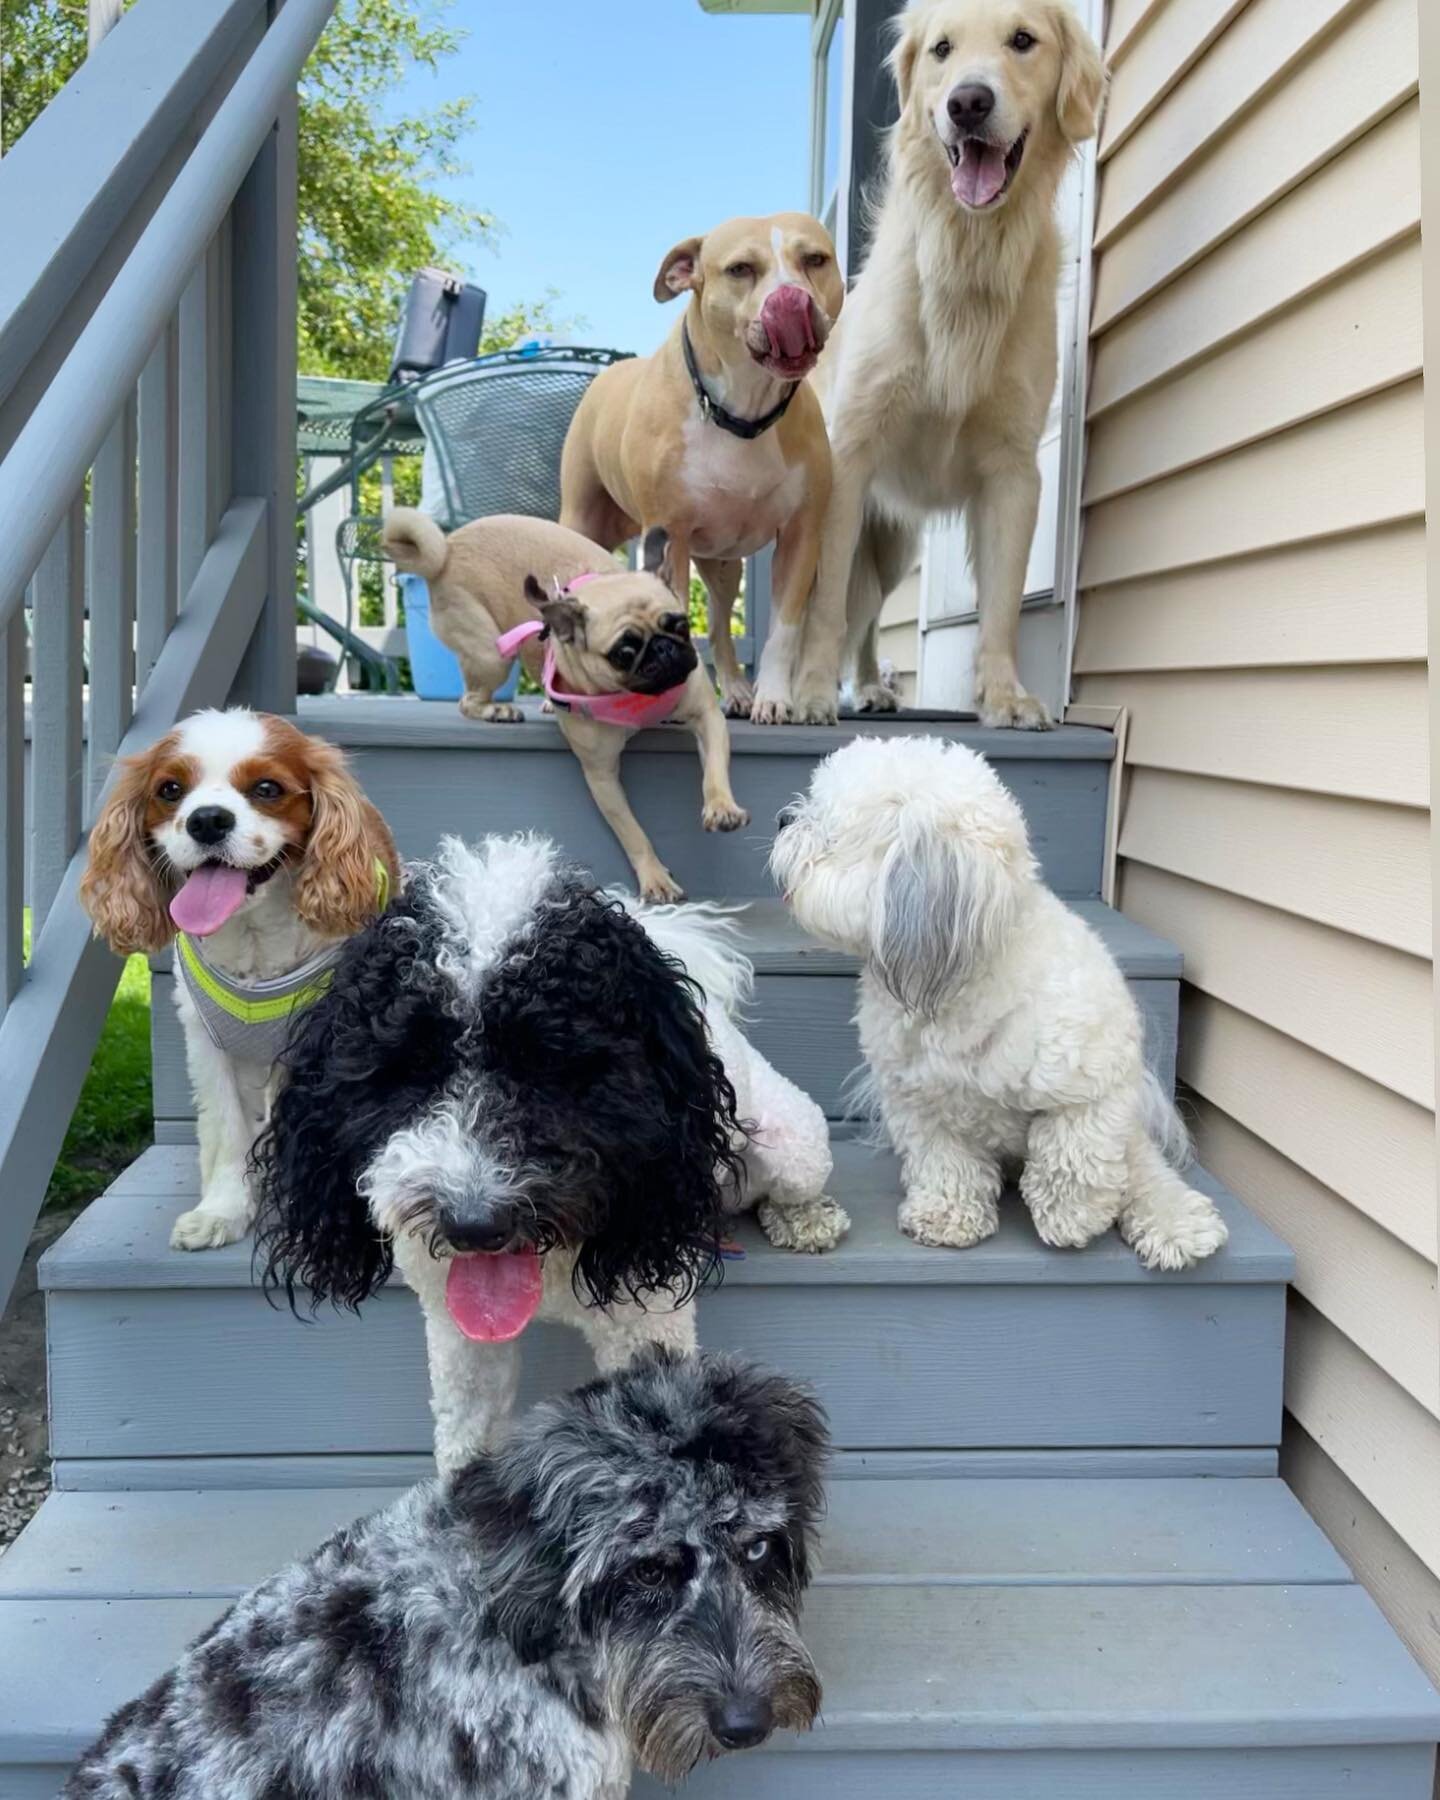 Saturday crew is all over the place. 😂🤷🏻&zwj;♀️. They are also FROM all over the place!  This weekend we have pups visiting from NYC and FL while their owners enjoy #newportri 😍

#crazymutts #dogsofinsta #dogstagram #dogsofinstagram #doglovers #d